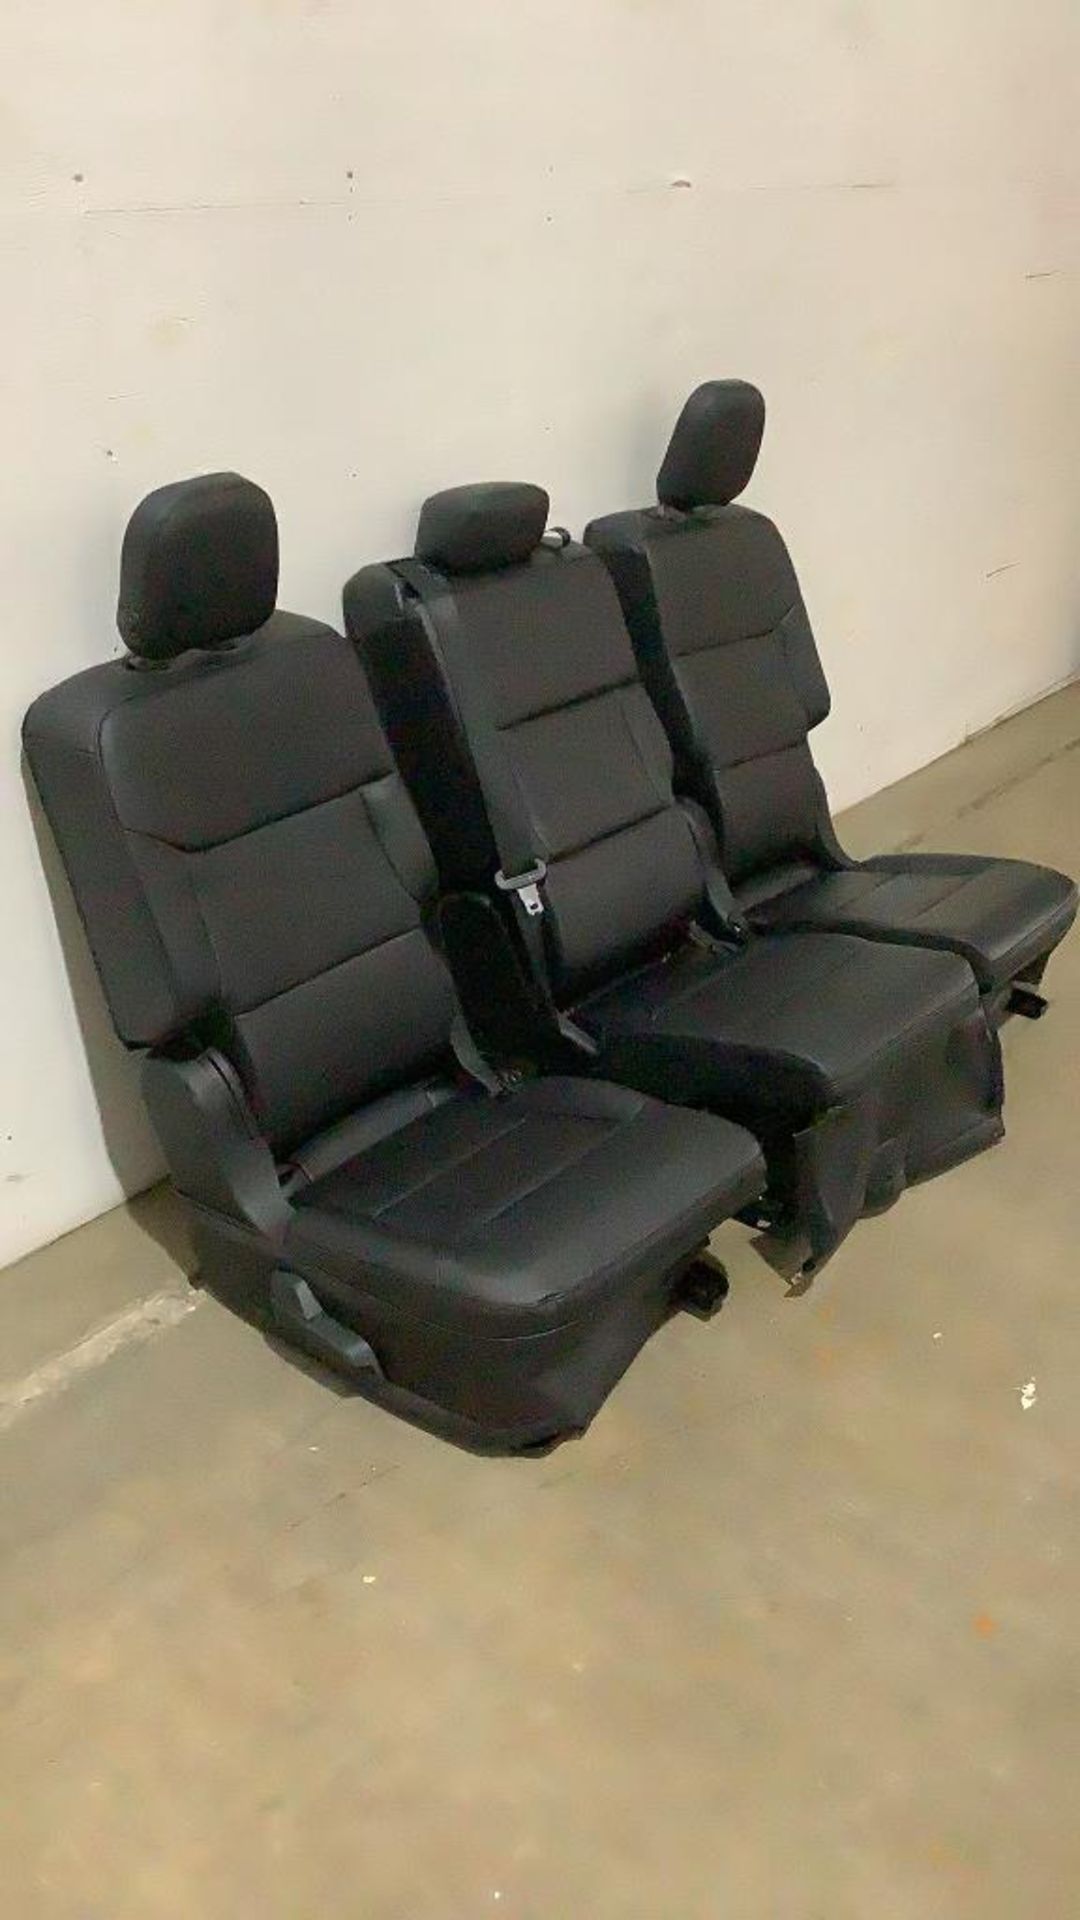 2020 Ford Explorer Set of Rear Seats - Image 3 of 12